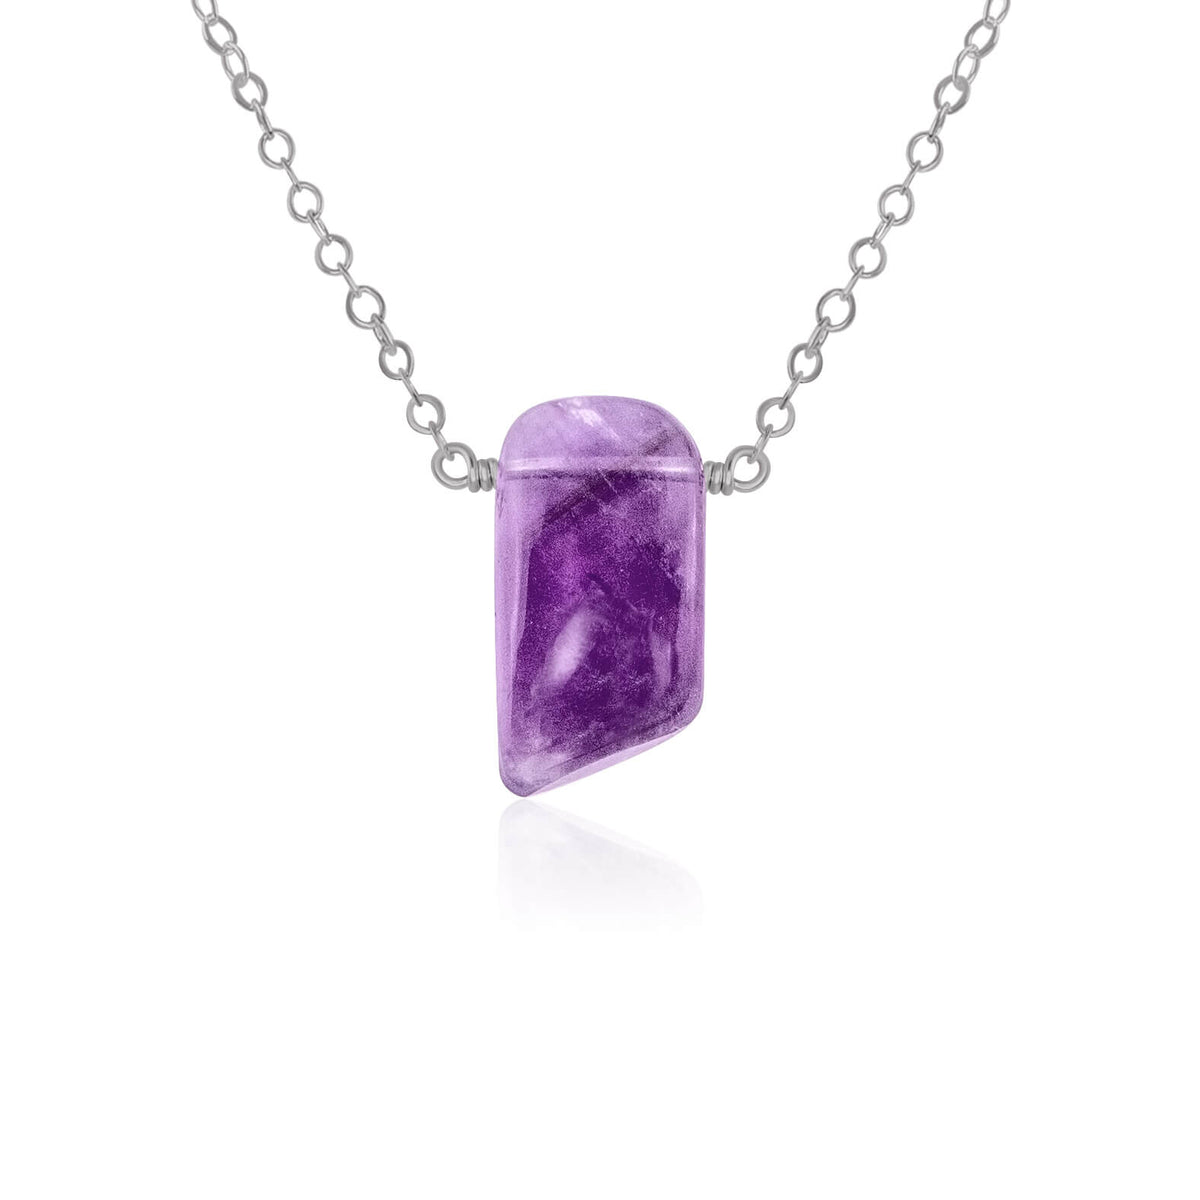 Small Smooth Slab Point Necklace - Amethyst - Stainless Steel - Luna Tide Handmade Jewellery